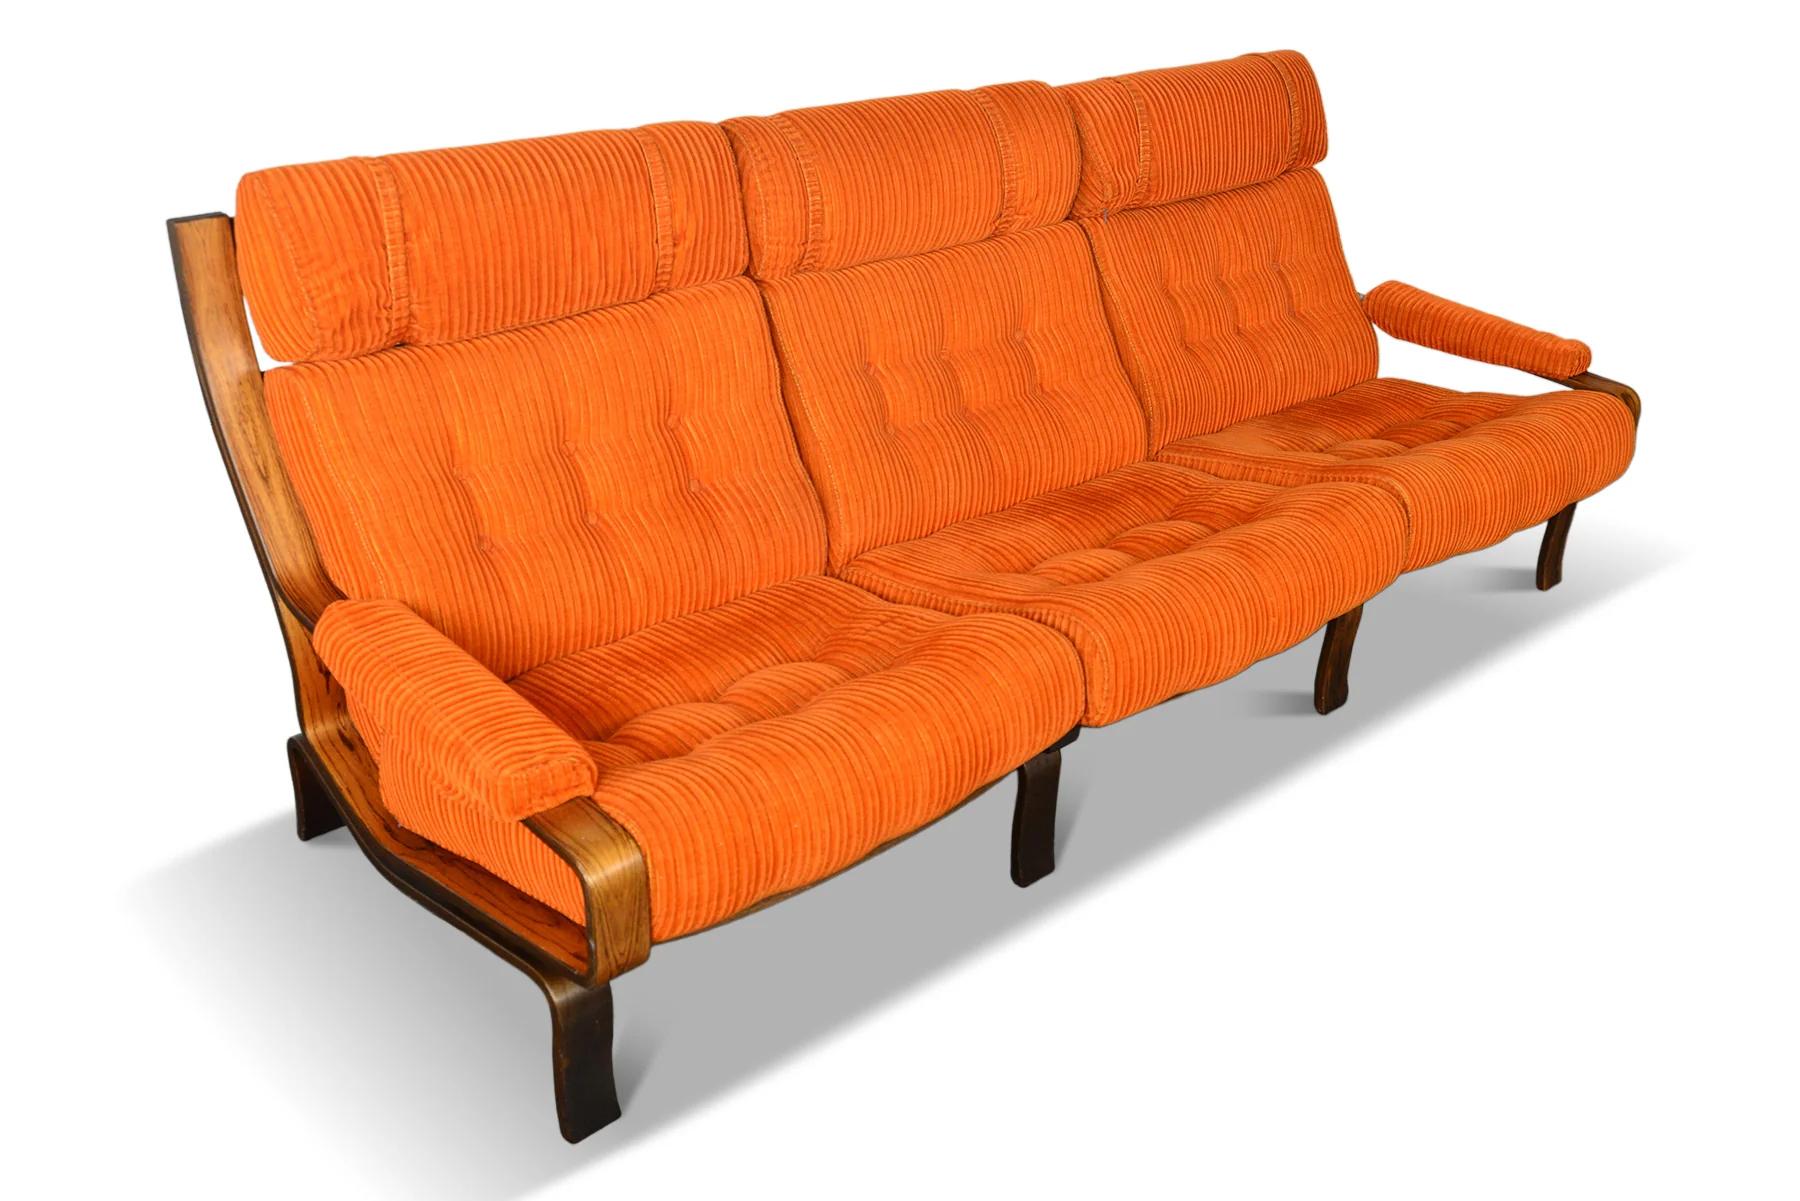 Swedish Modern Bent Rosewood Sofa by Lindlofs Mobler In Excellent Condition For Sale In Berkeley, CA